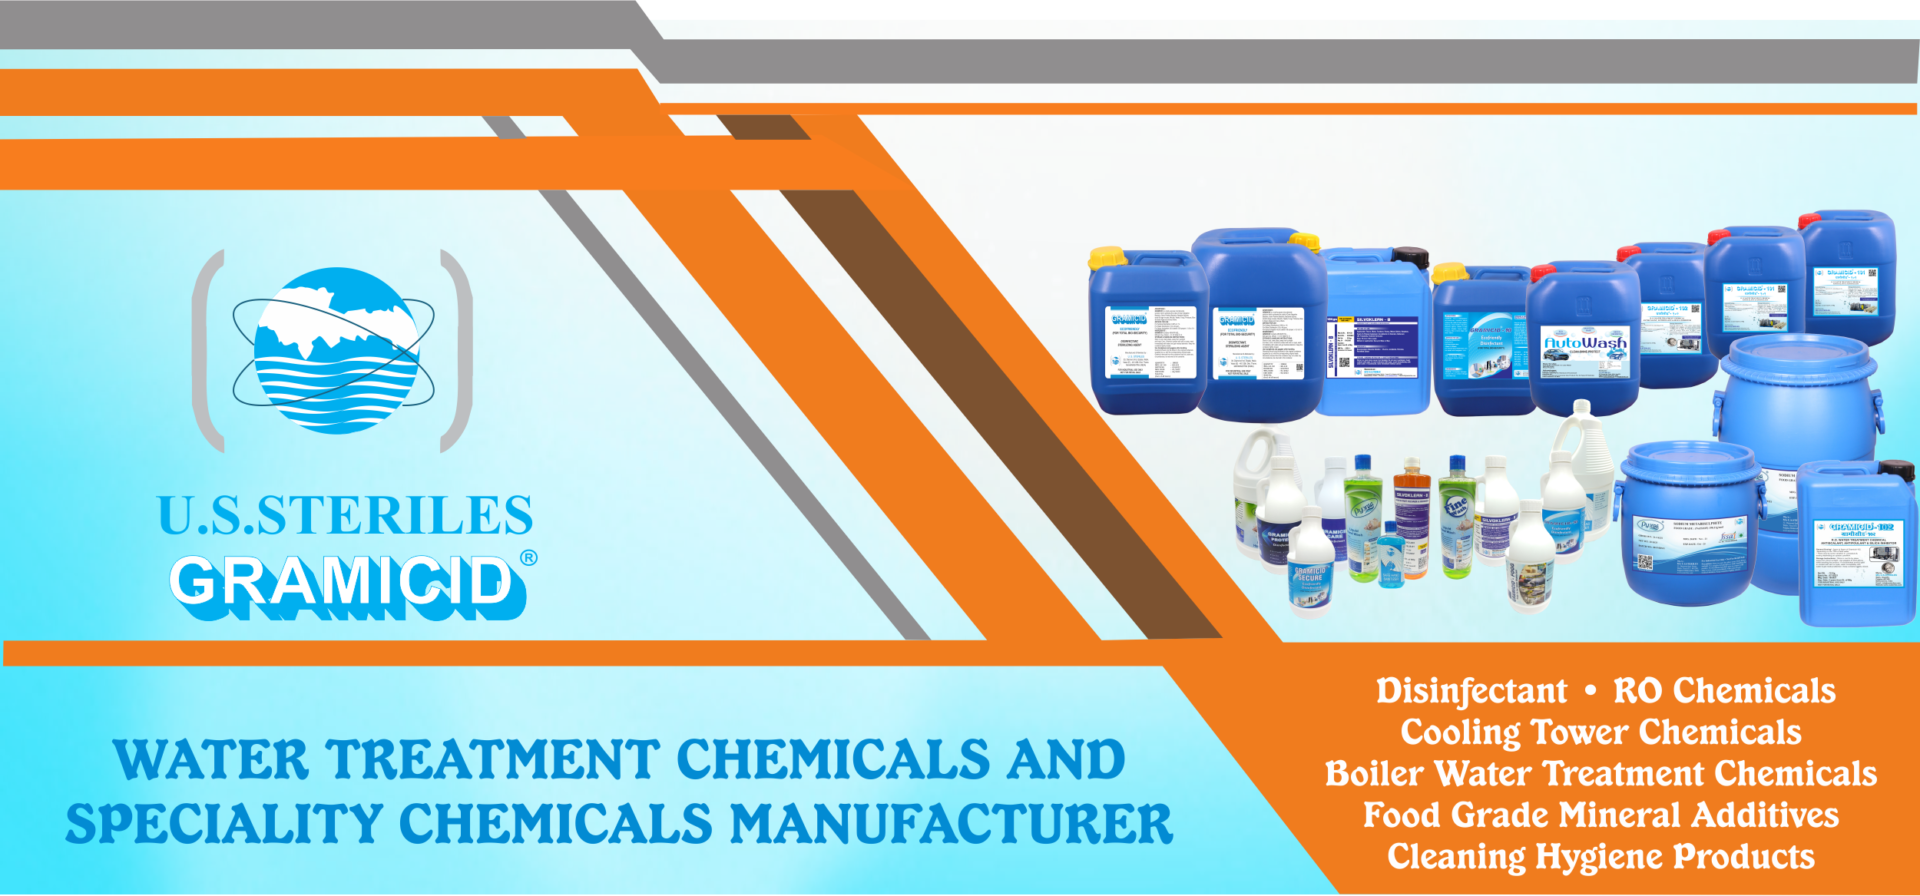 Water Treatment Chemicals, Disinfectant,Speciality Chemicals